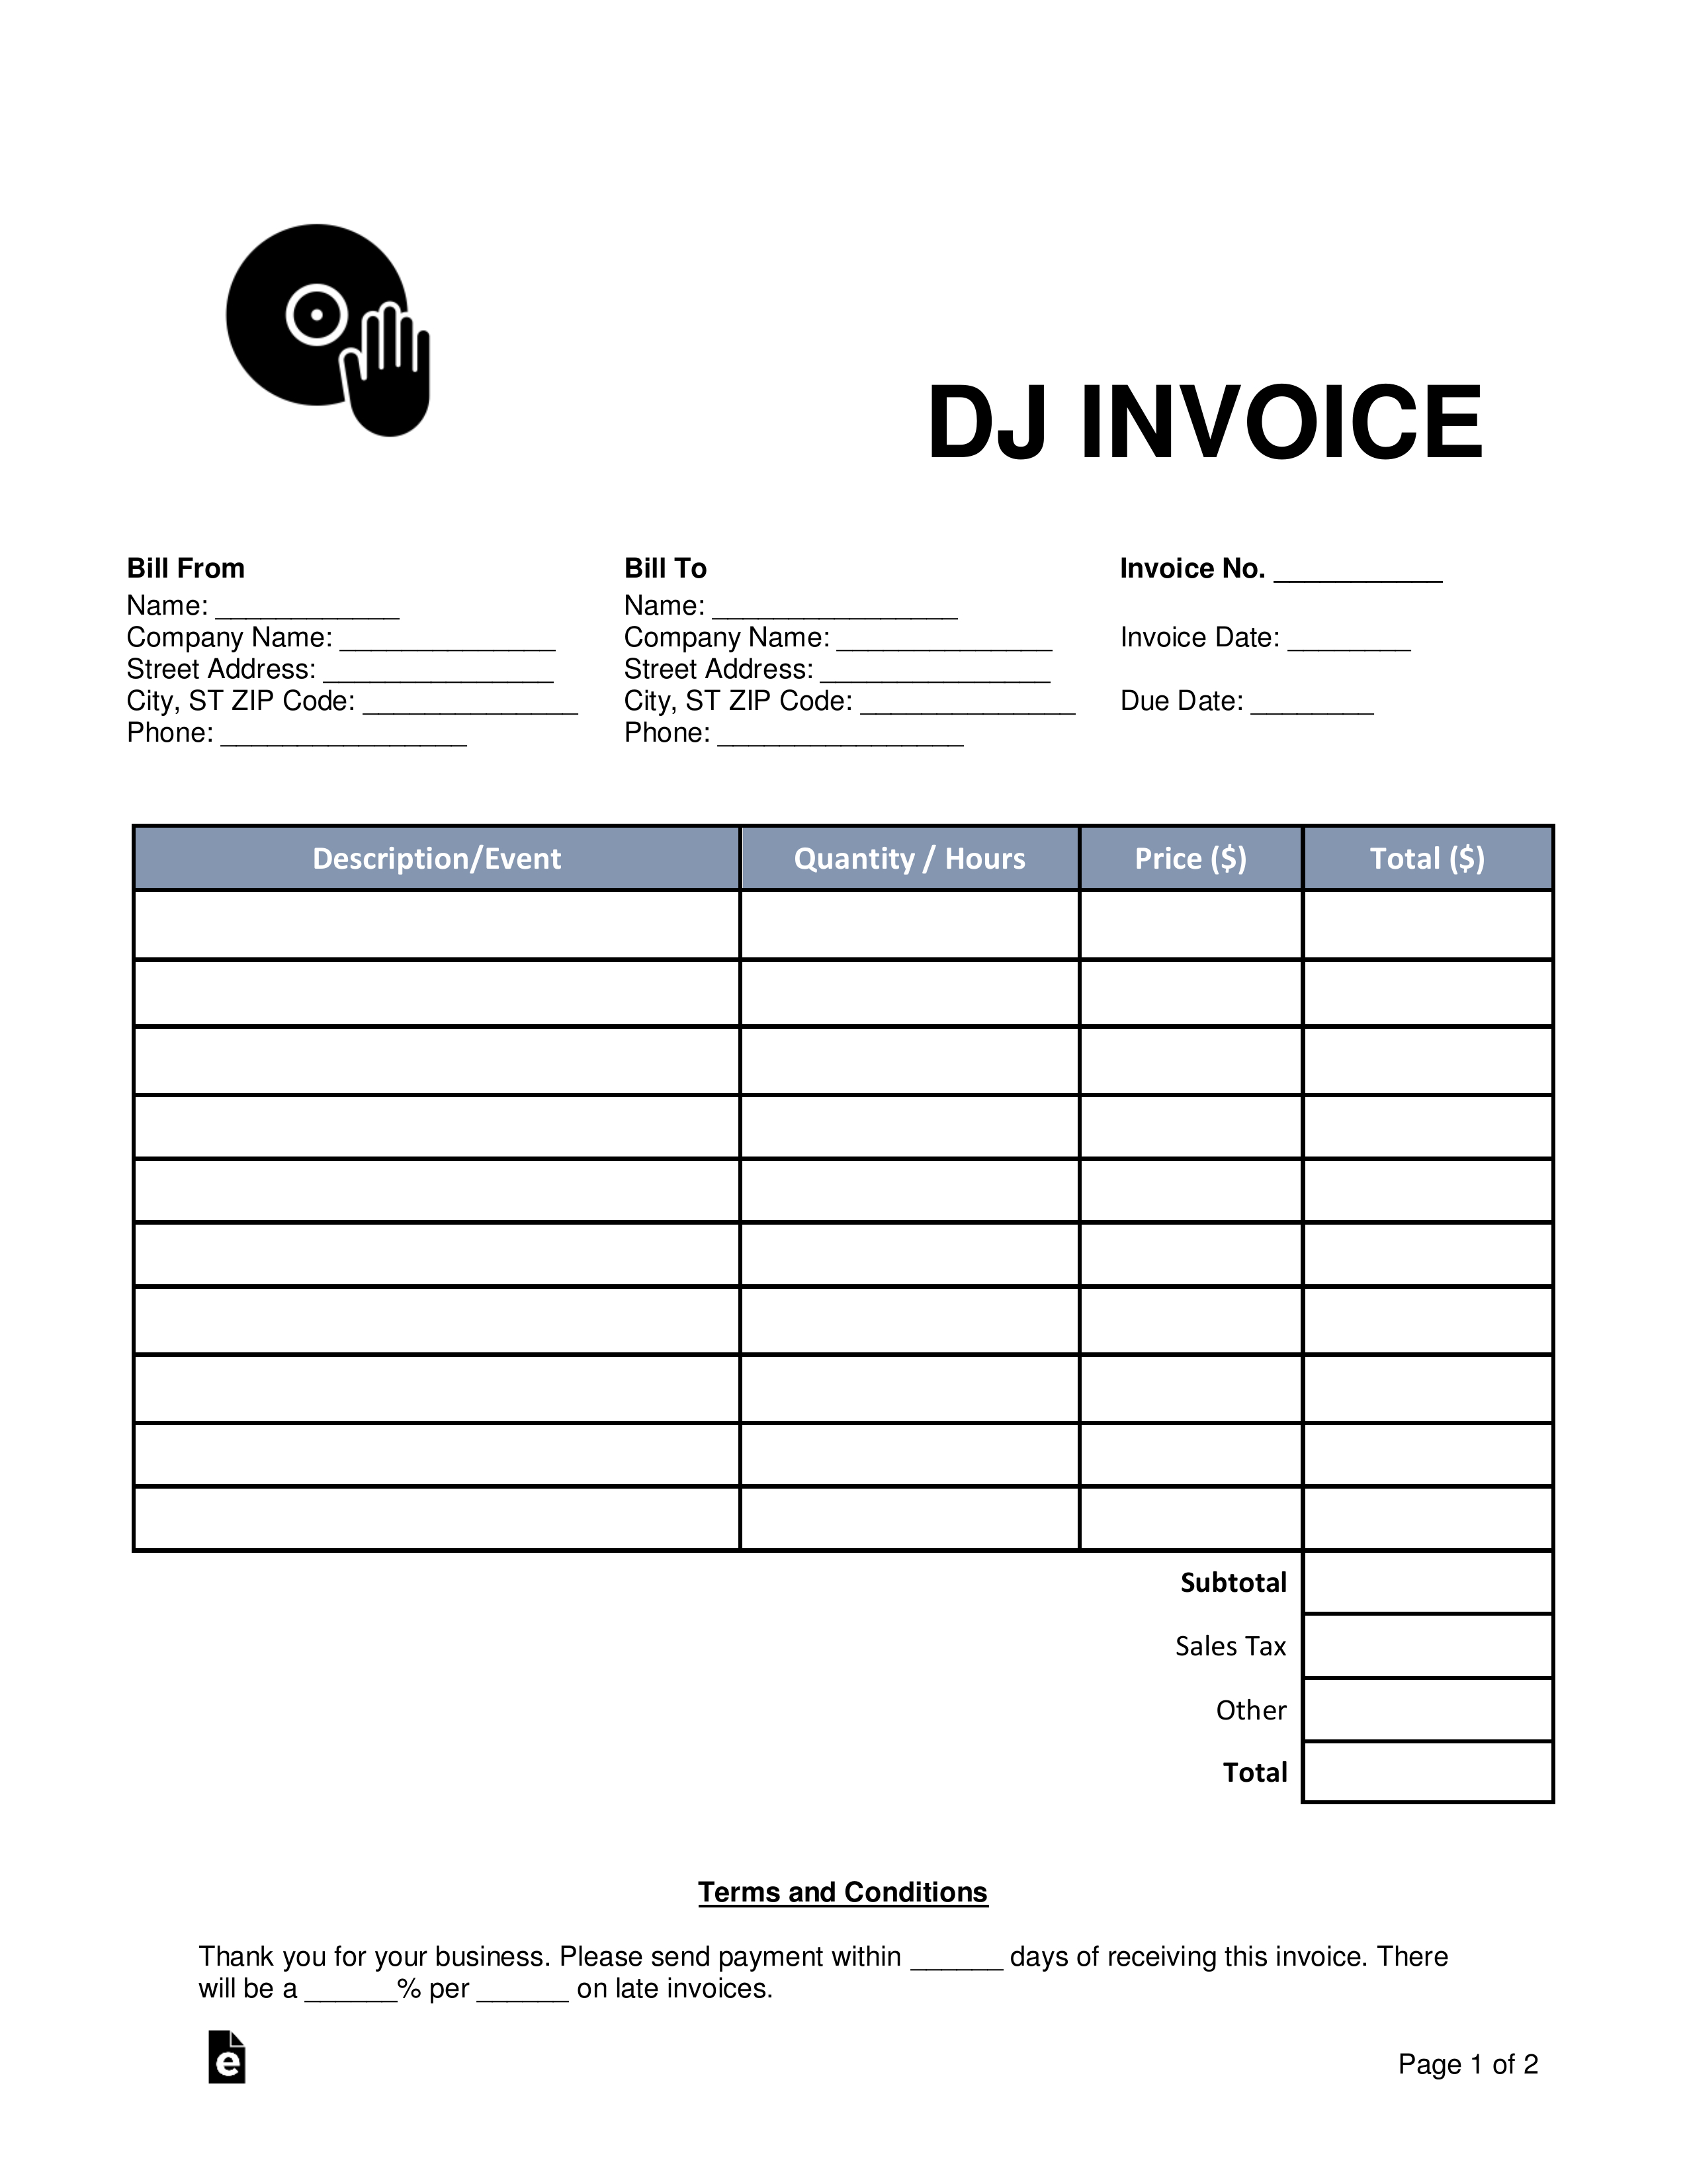 Free Dj (Disc Jockey) Invoice Template - Word | Pdf | Eforms in Invoice Template For Dj Services